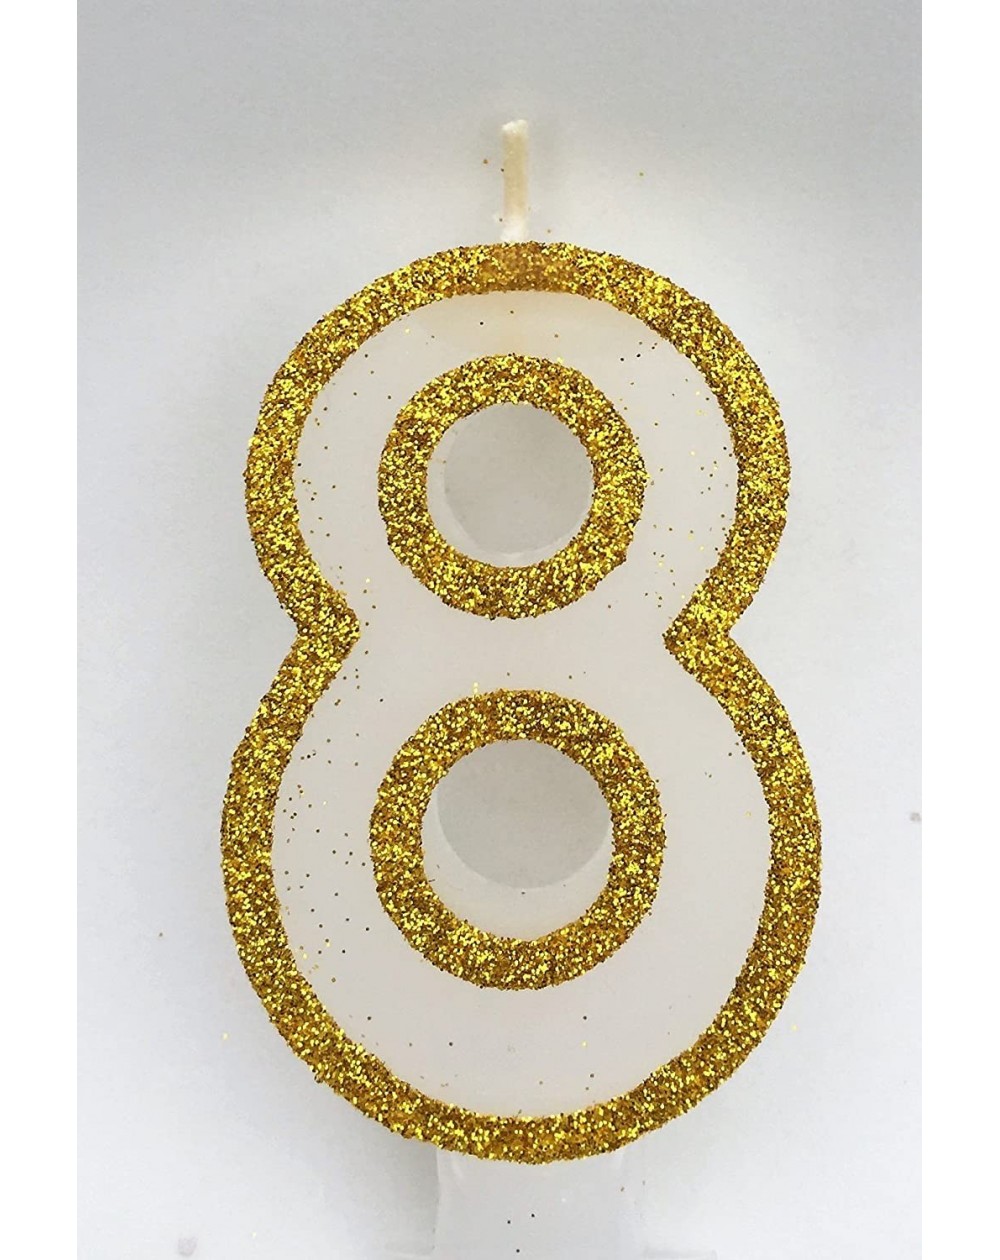 Birthday Candles No (8) Birthday Candle - Gold Glitter - Browse Our Store and Choose Other Numbers - CZ17YETM7I2 $11.33